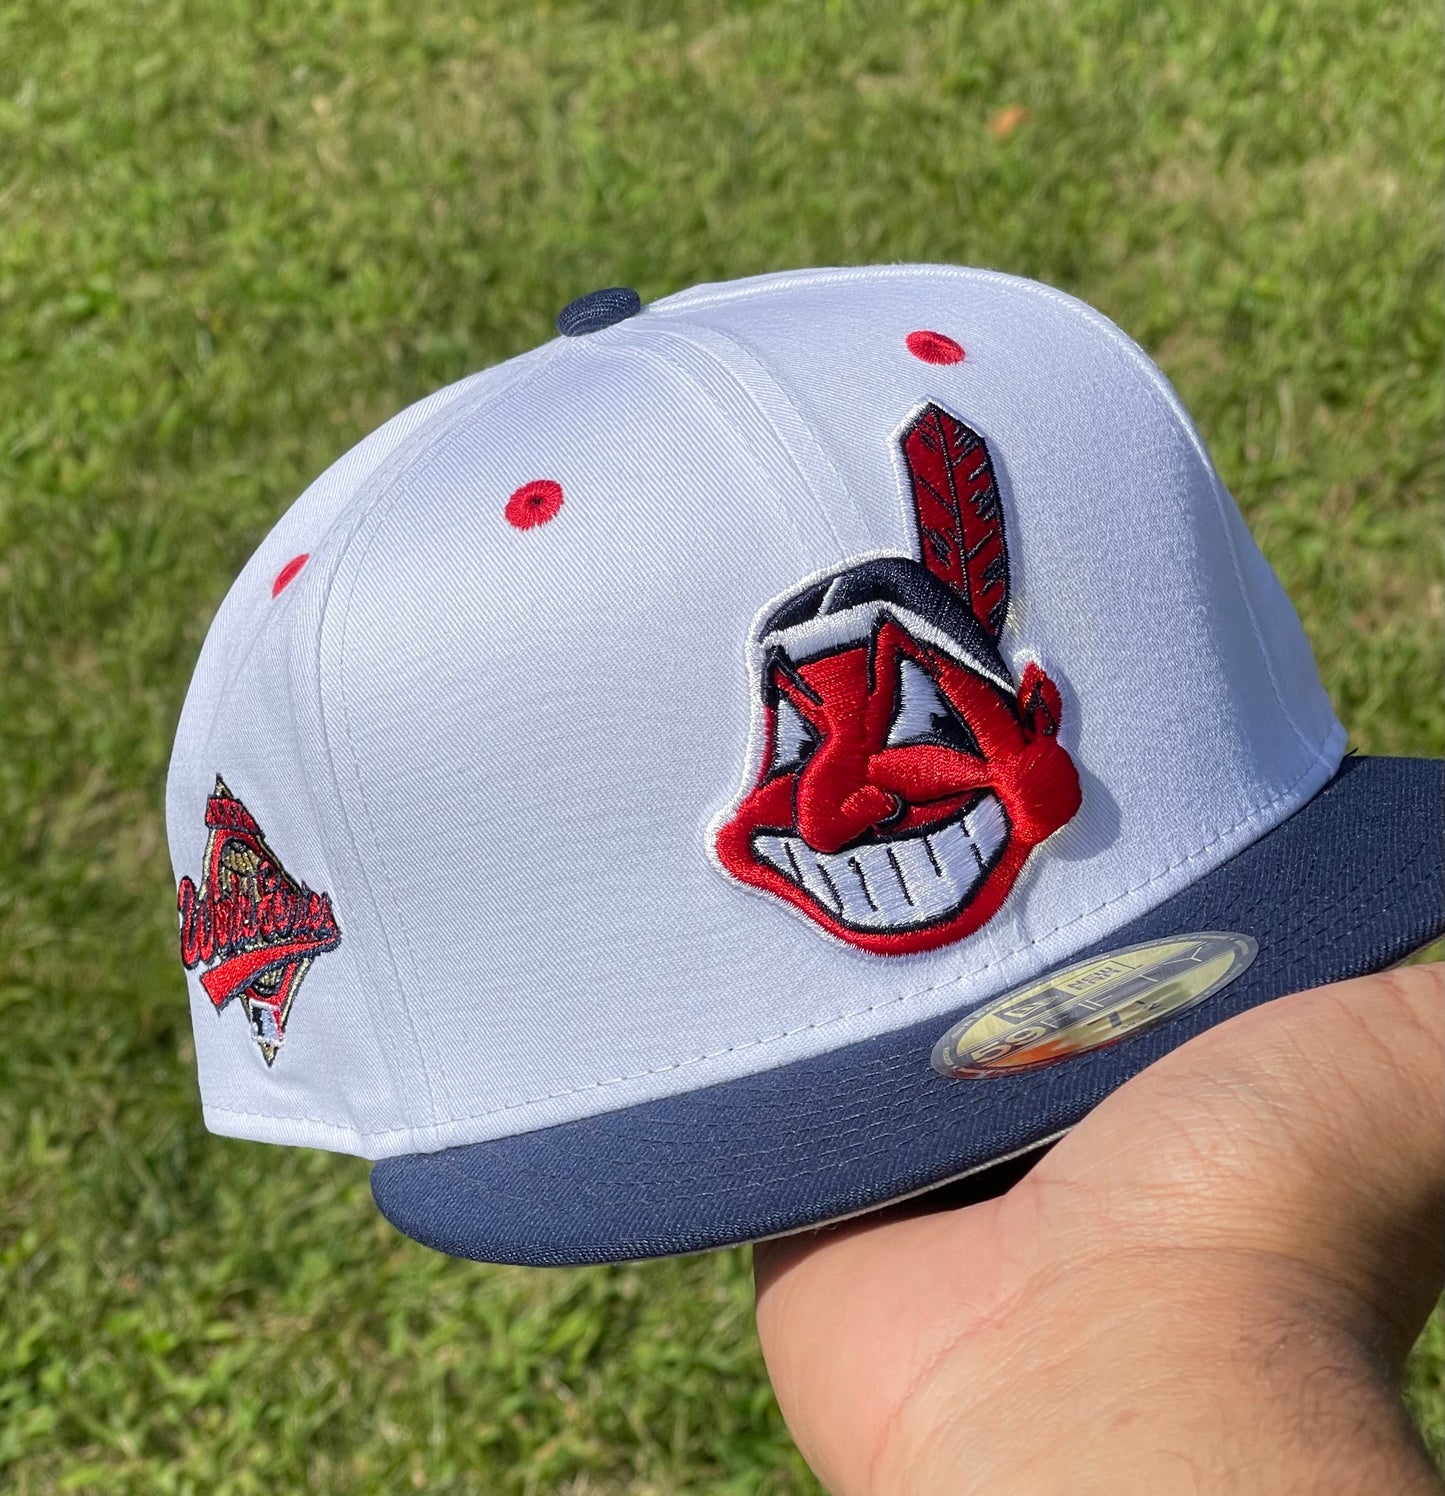 Cleveland Indians Chief Wahoo Banned Logo Two Tone 1997 World Series Fitted (White/Navy Blue) + Free Pin